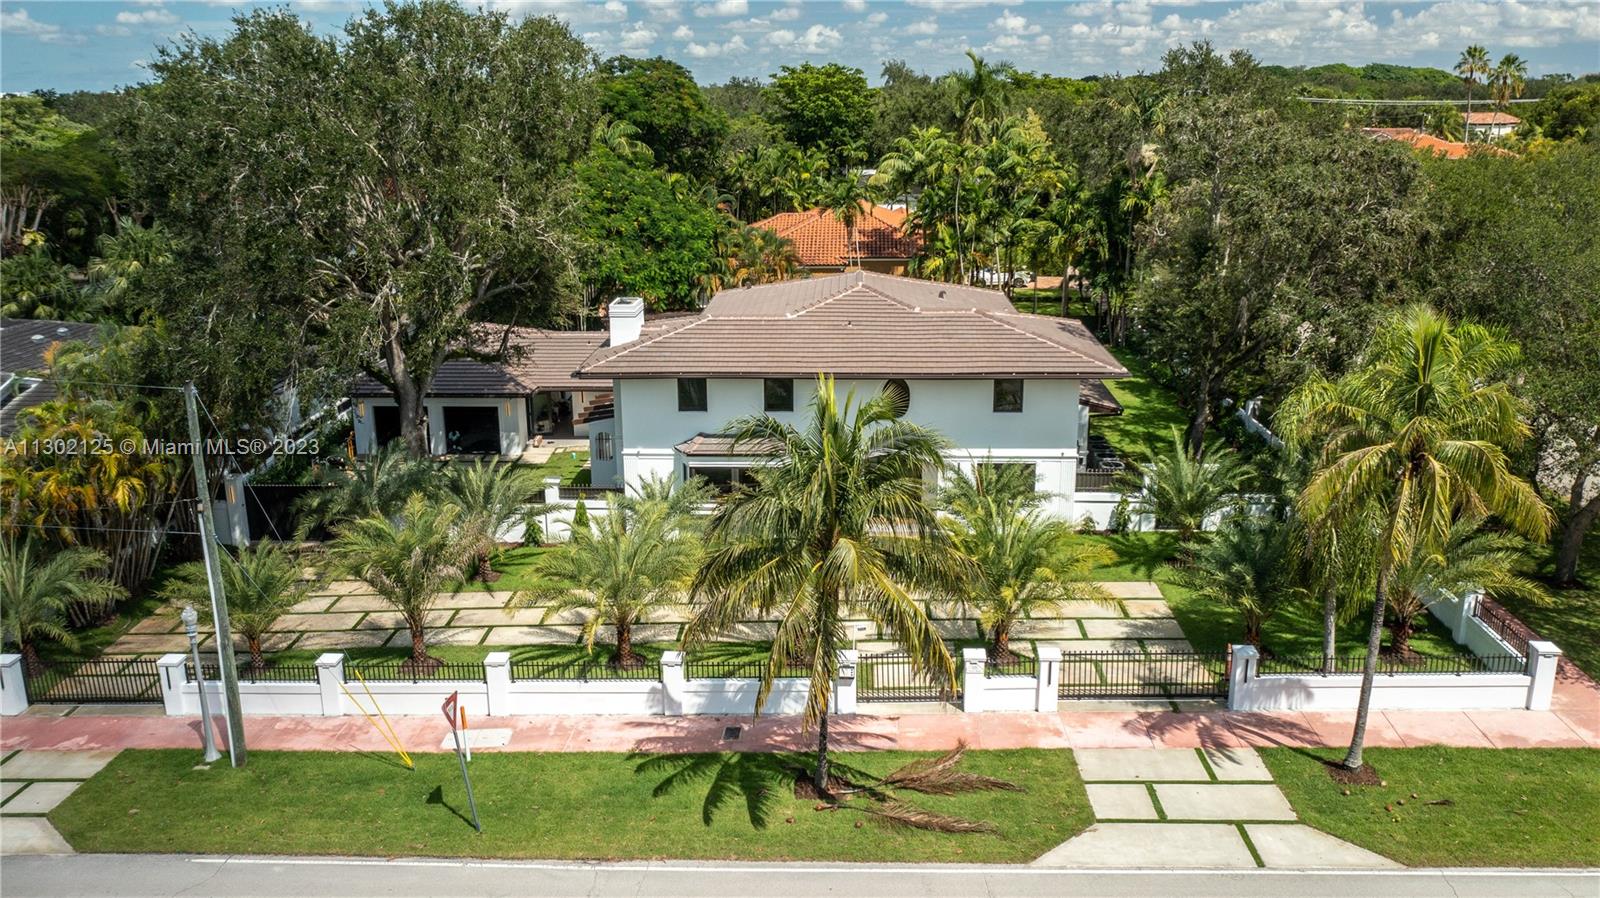 Check out this stunning home in the prime location of Coral Gables on an oversized corner lot. This home is completely custom built with high end modern finishes. Gourmet kitchen features custom modern cabinetry, accent lighting, oversized island, double sinks, quartzite countertops, Miele appliances and gas stove. Wood flooring throughout adds elegance to every room. Each one of the six bedrooms has it's own bath and an additional half bath for living area. Master bedroom has a wet bar as well as the entertainment room and family room. Laundry room with double washer and dryer. Two car garage. Outside, enjoy the gas heated pool and ample deck area with a roofed terrace and balcony upstairs. Smart home features. Owner financing available. Estimated completion March 2023.